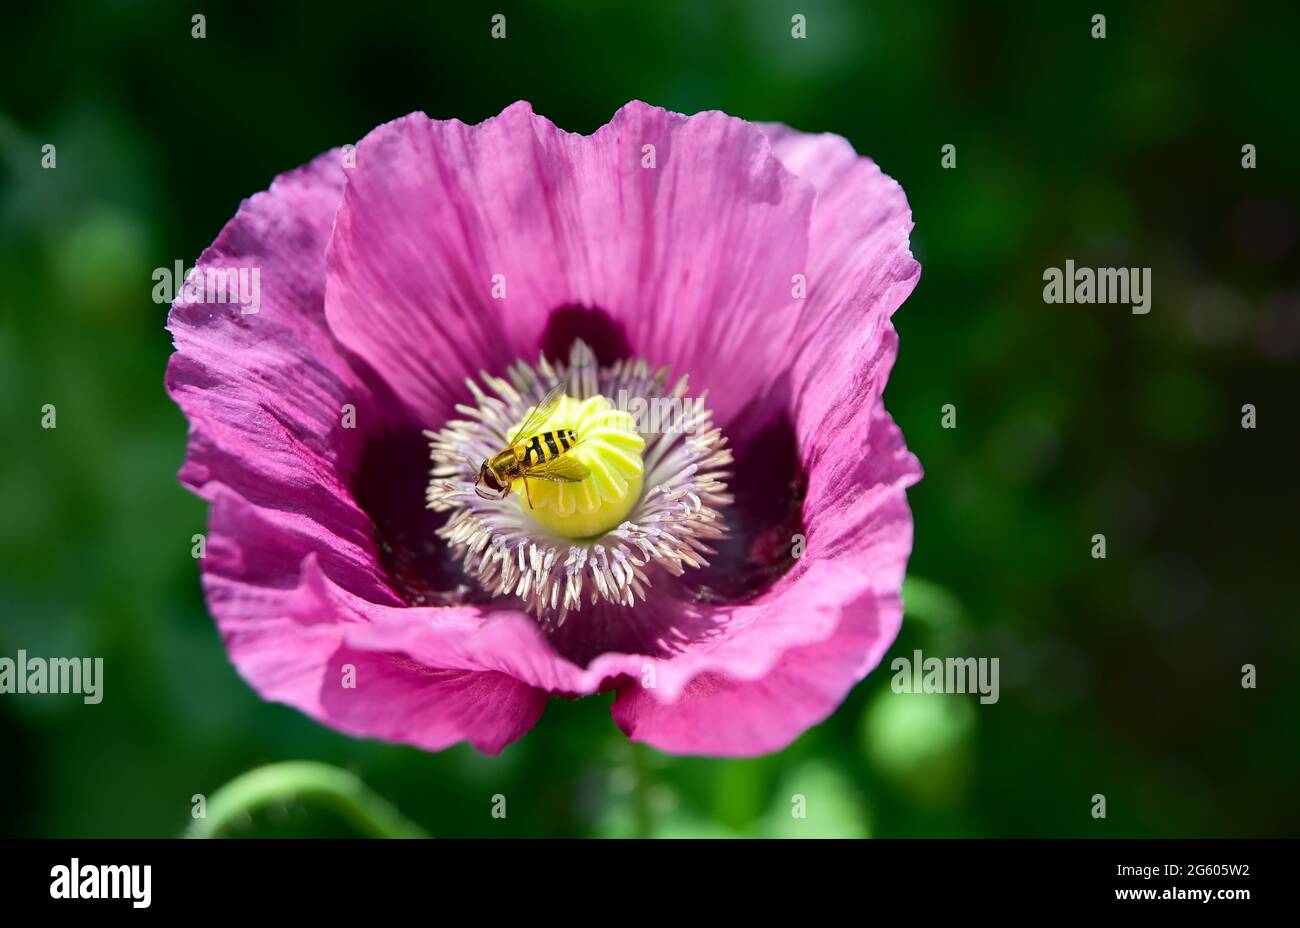 Brighton UK 1st July 2021 - A hoverfly settles on a poppy flower in warm sunshine in a Brighton garden today . With the decline of bees in the UK overflies play an important part in the pollination of plants : Credit Simon Dack / Alamy Live News Stock Photo